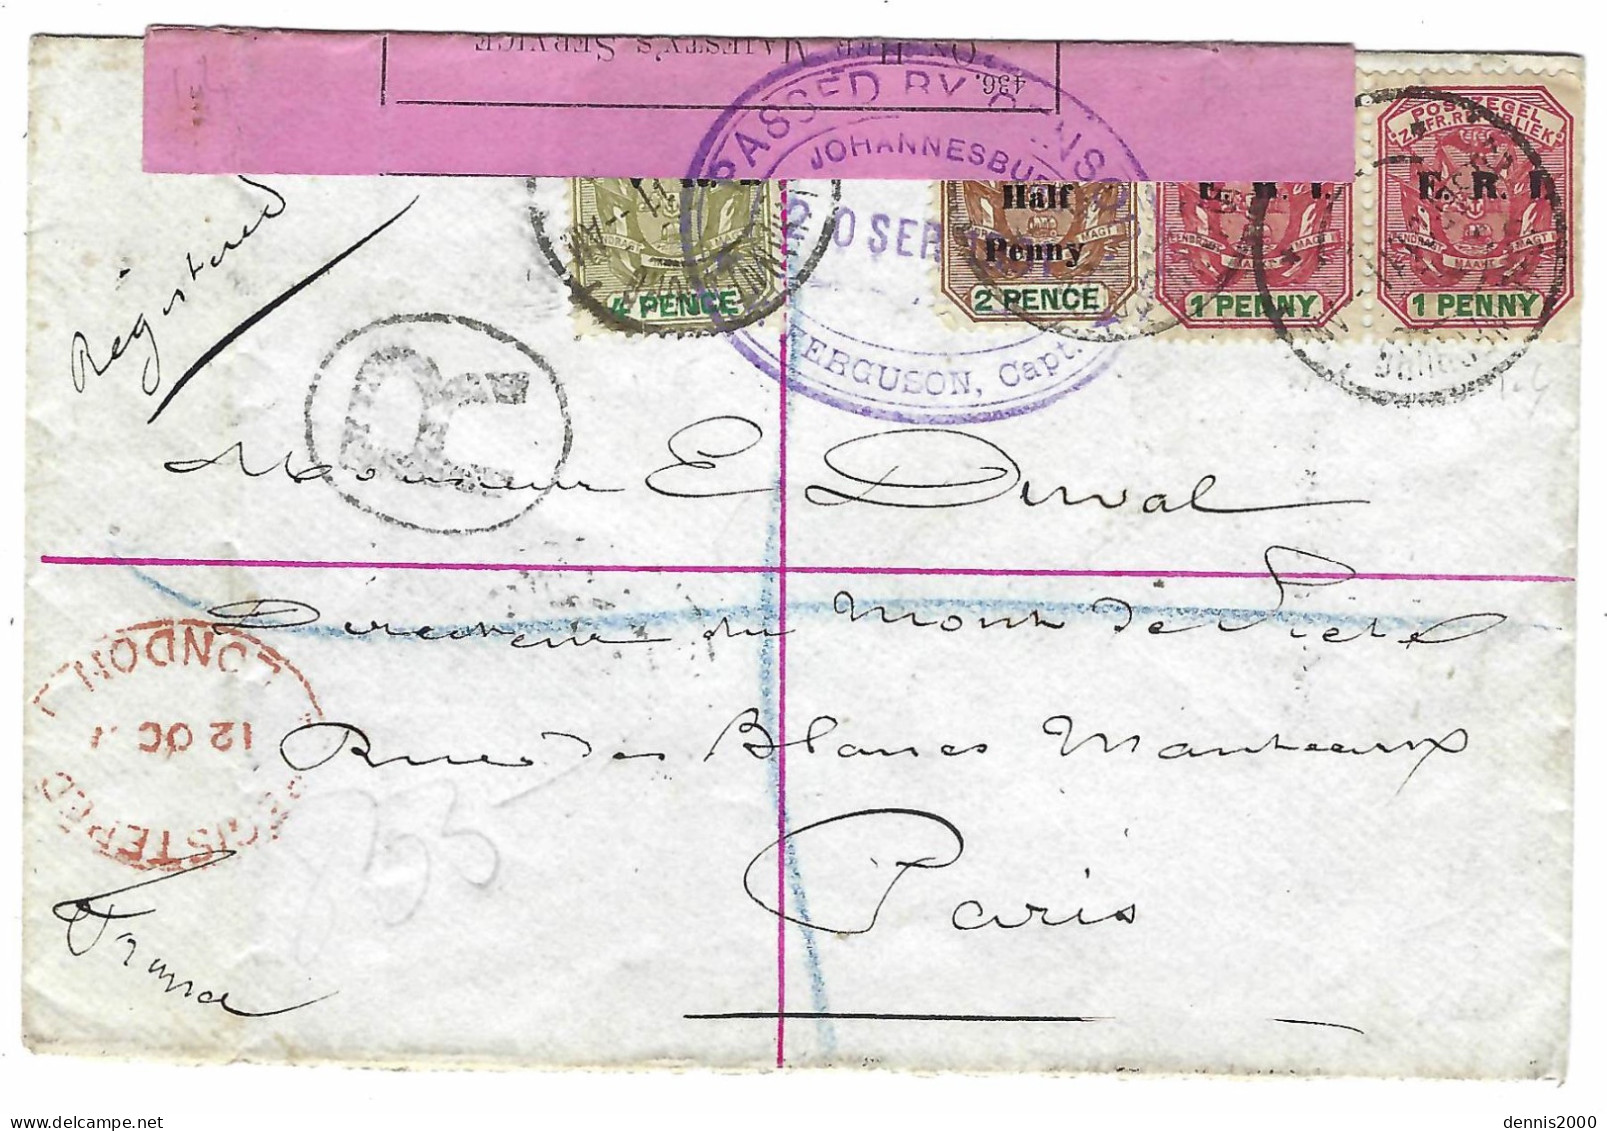 1901 - REG. Cover From Johannesburg To Paris - Mixed Fr. Great Britain Way - " PASSED BY CENSOR / Ferguson Capt. " - Transvaal (1870-1909)